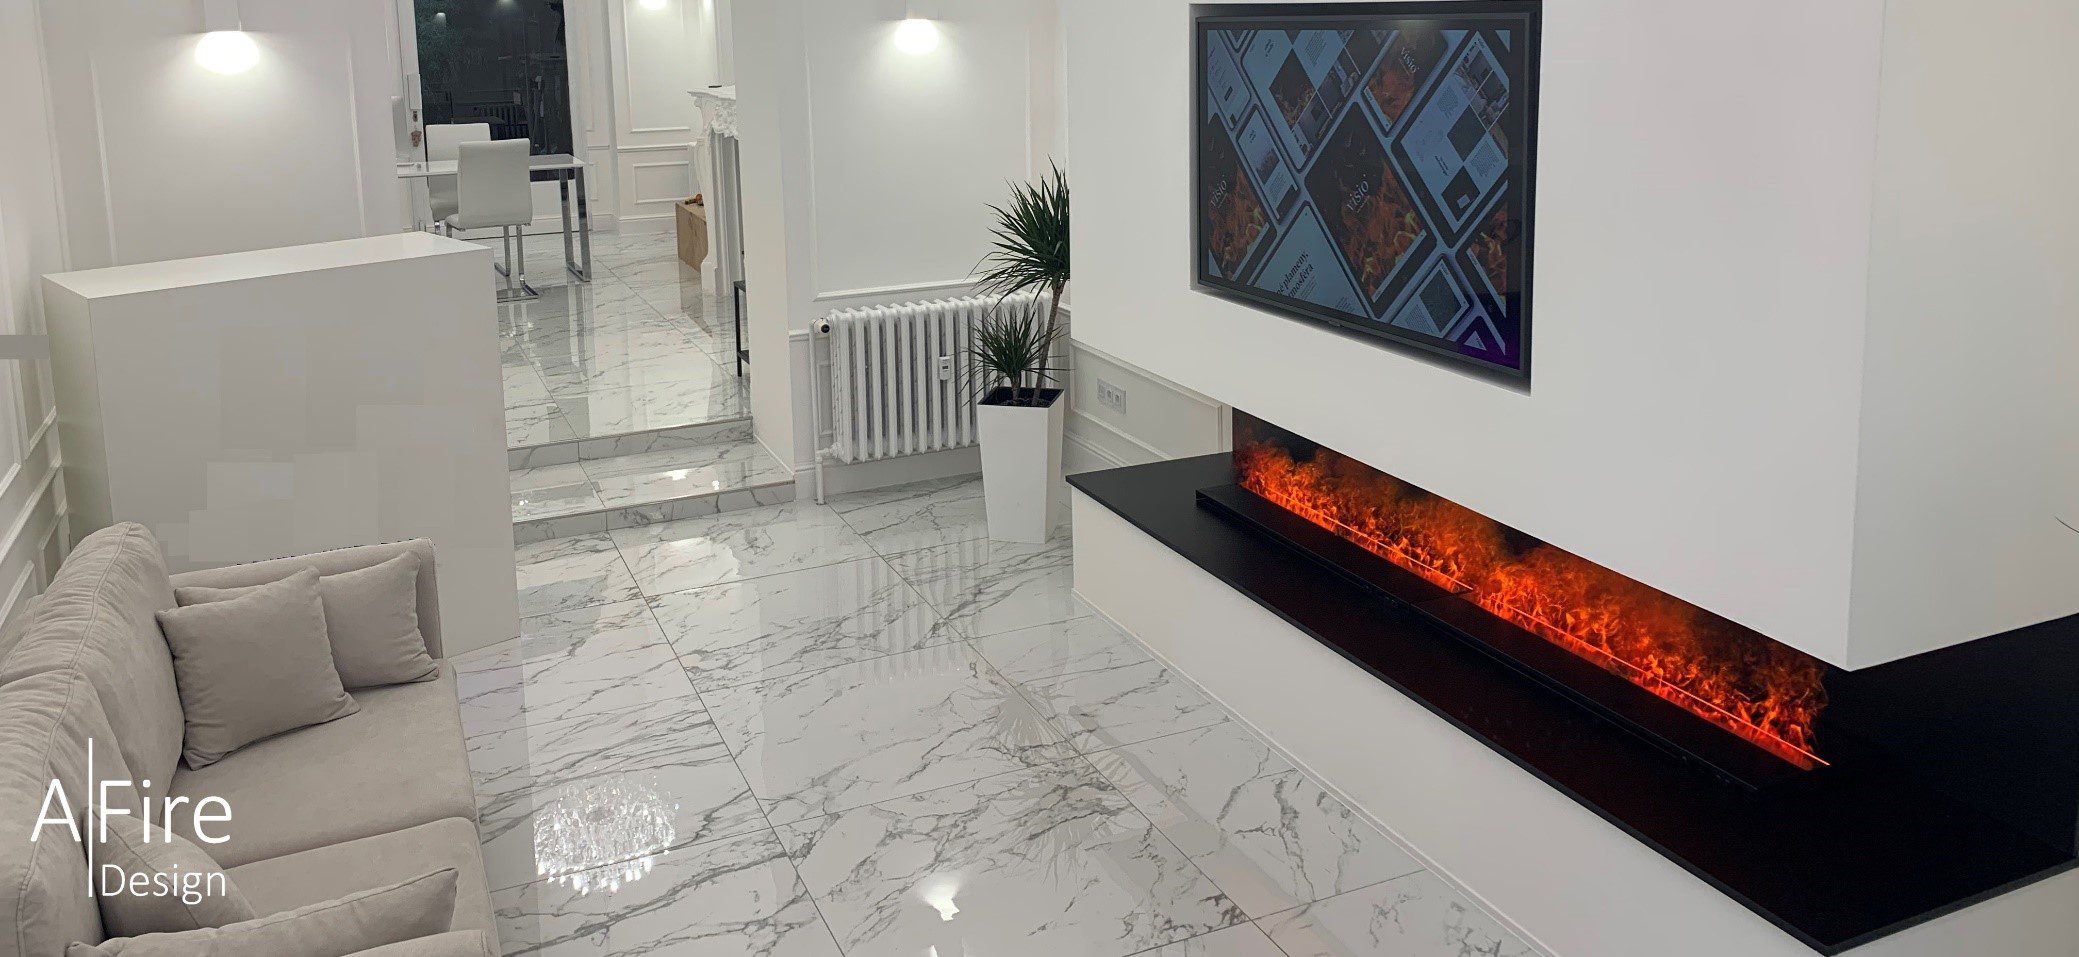 Water vapor fireplace for apartment